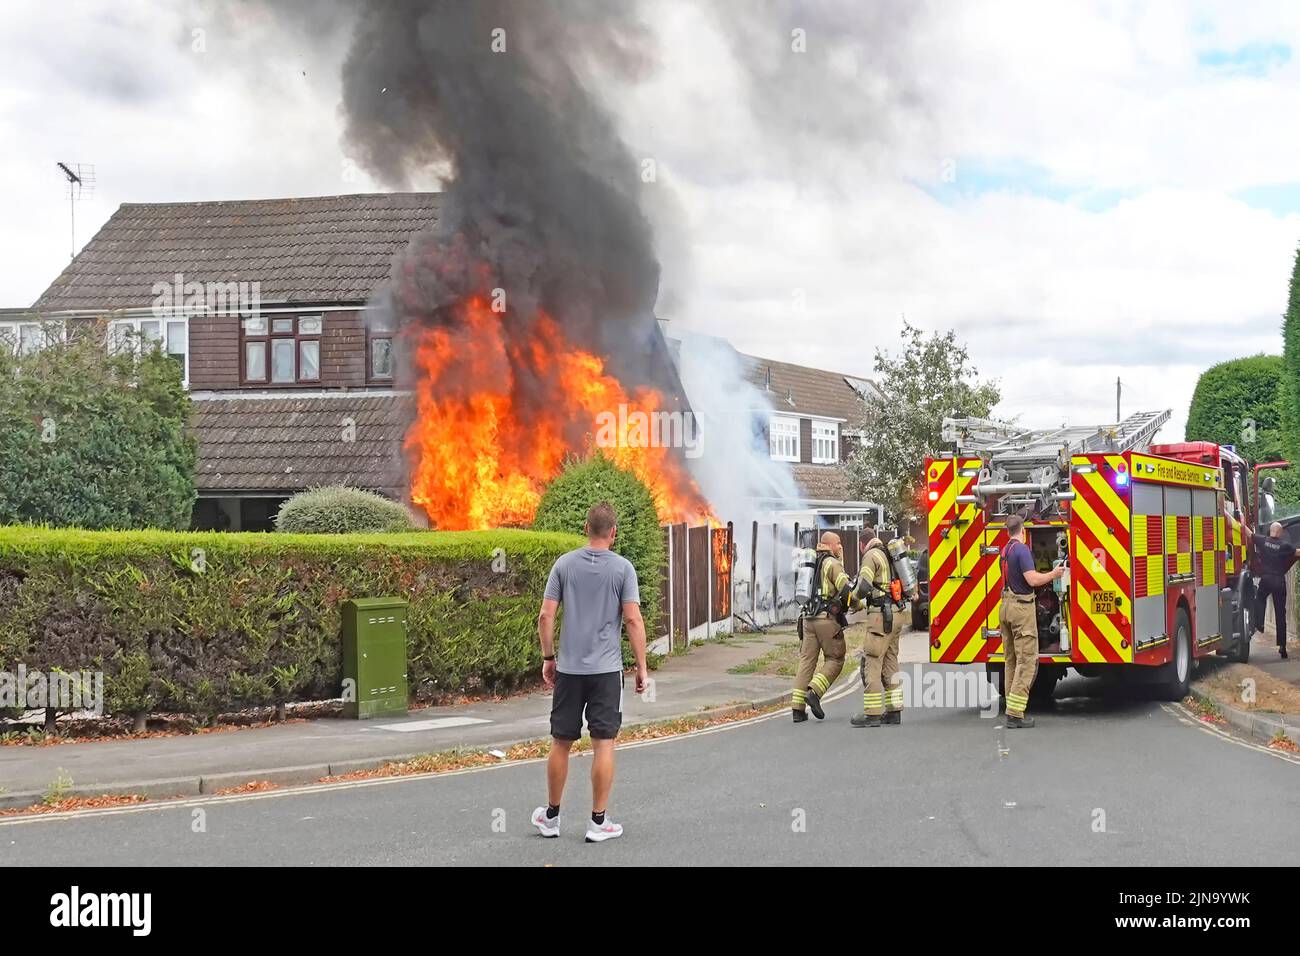 Flames & black smoke greet Essex Fire and Rescue services firemen arriving at house fire brigade fire engine & firefighters with spectator watching UK Stock Photo